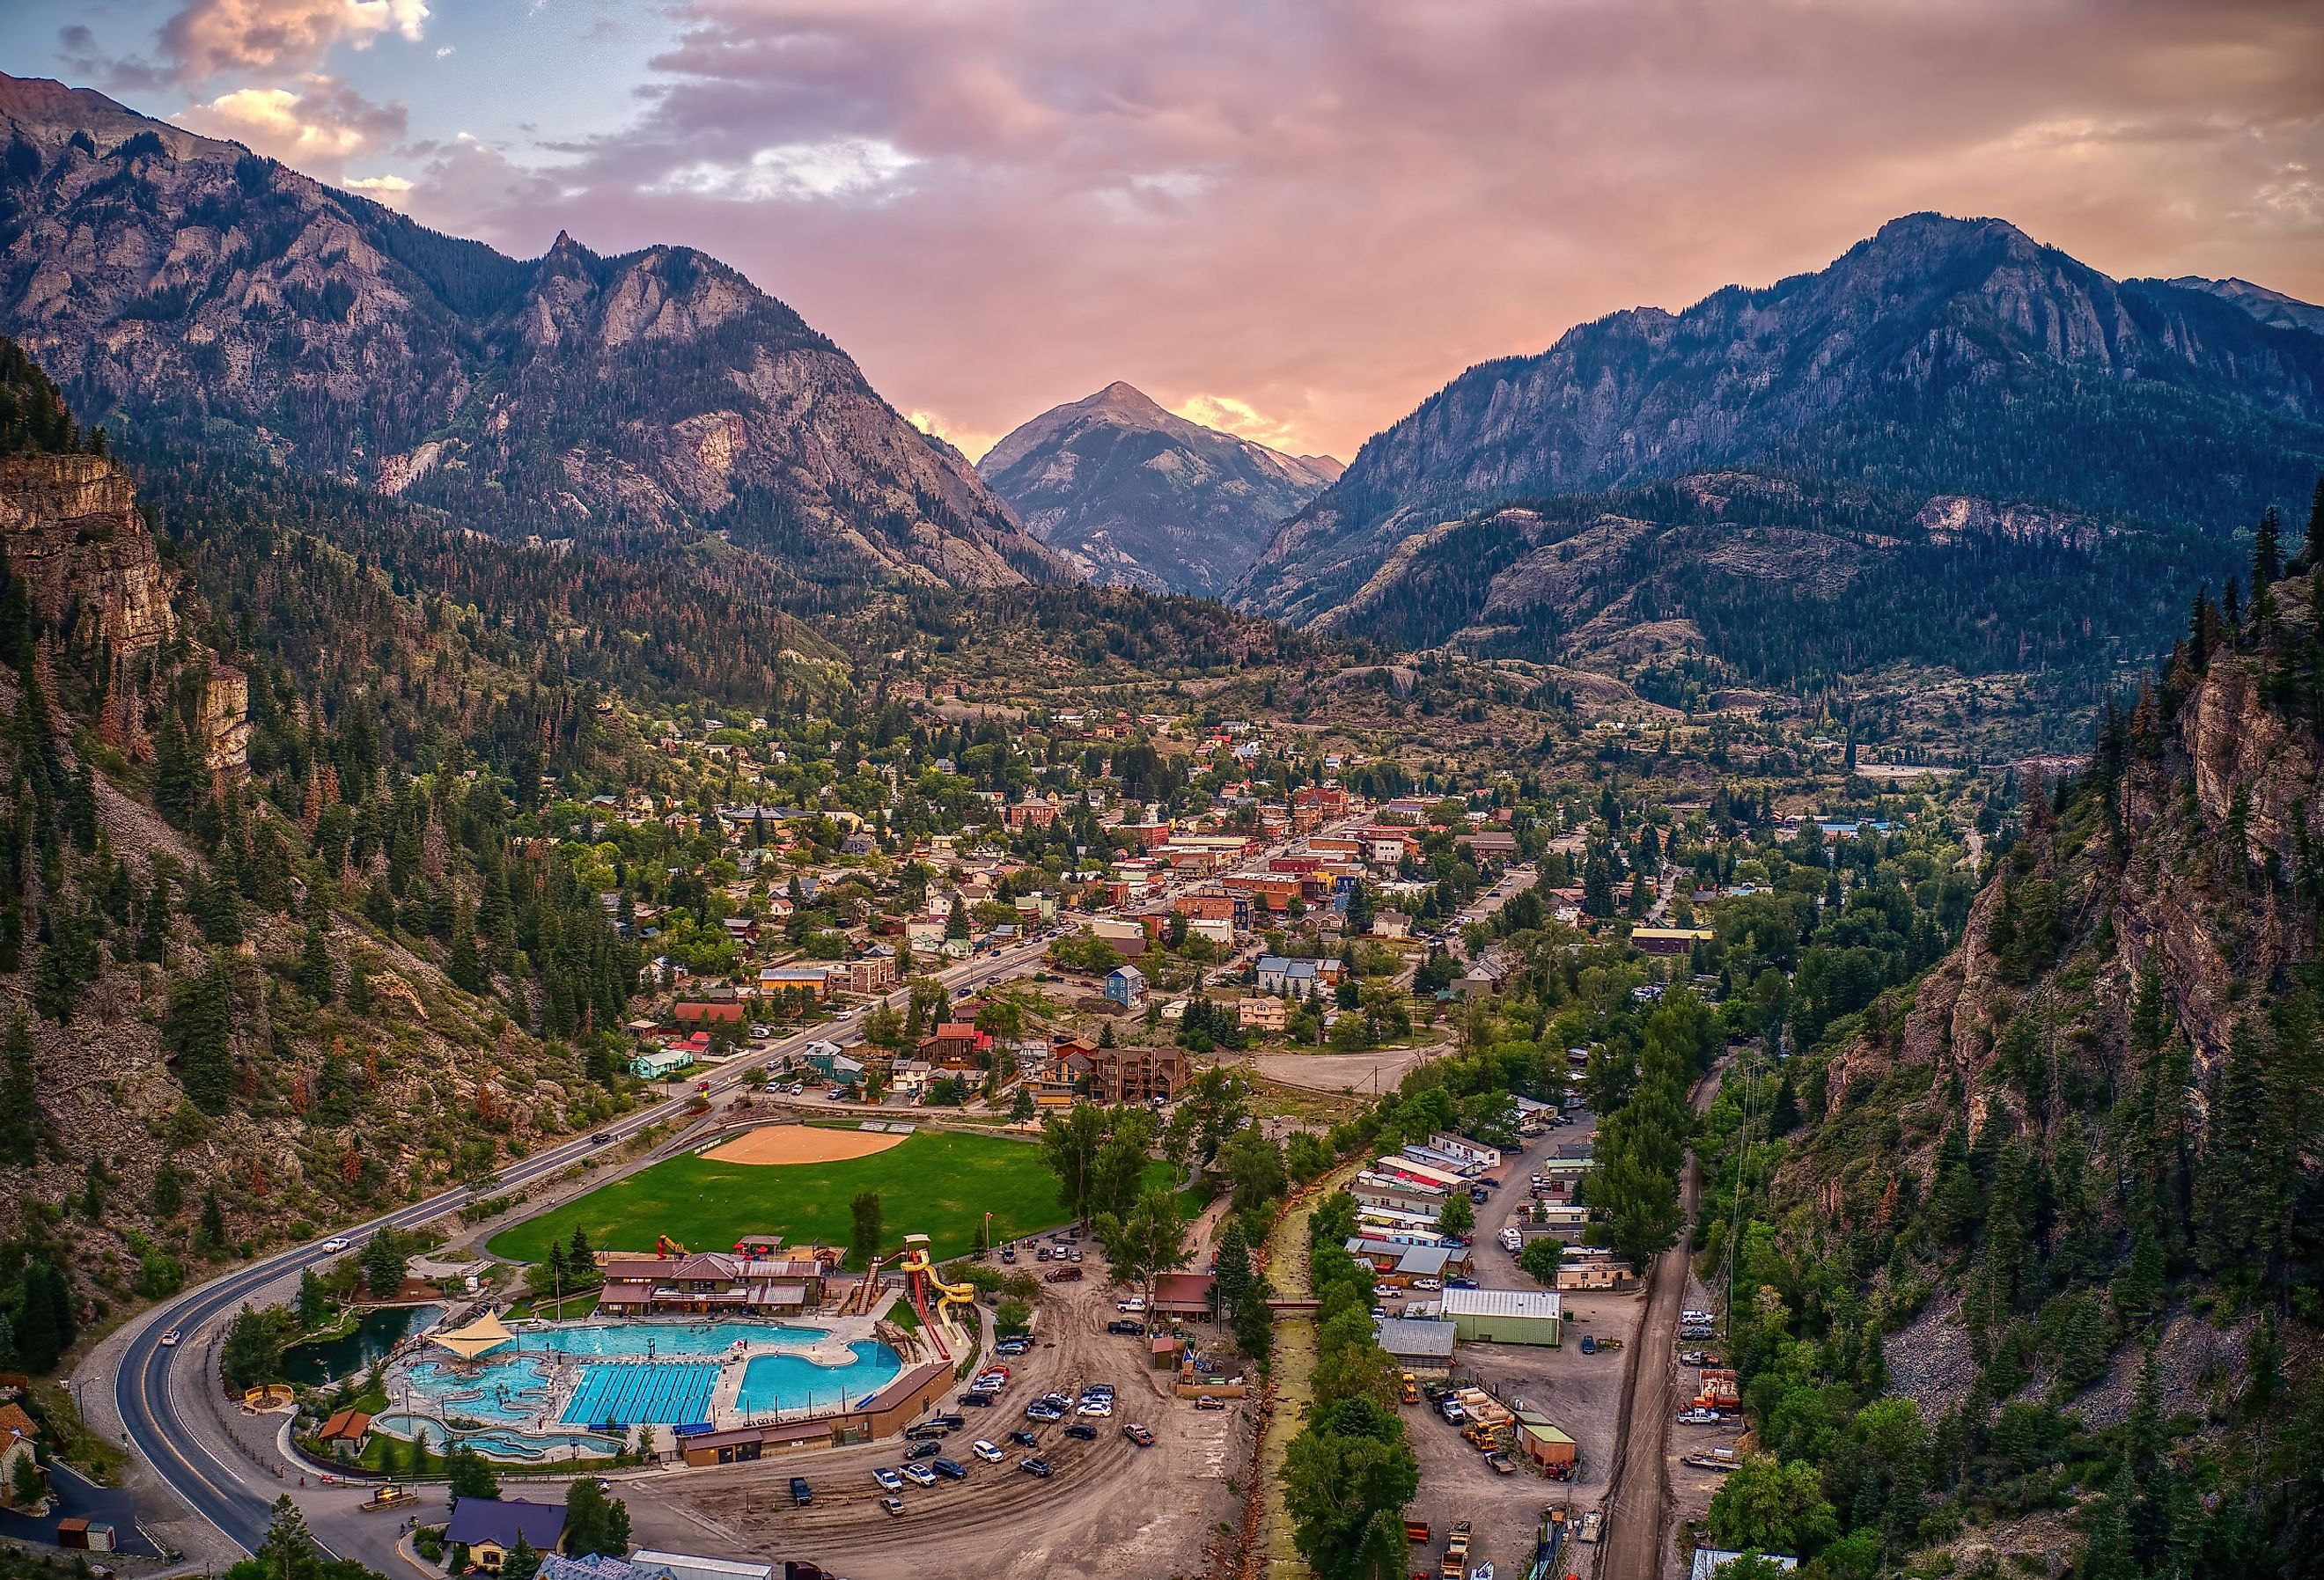 Aerial view of Ouray, a small Mountain Town with a Hot Springs Aquatic Center